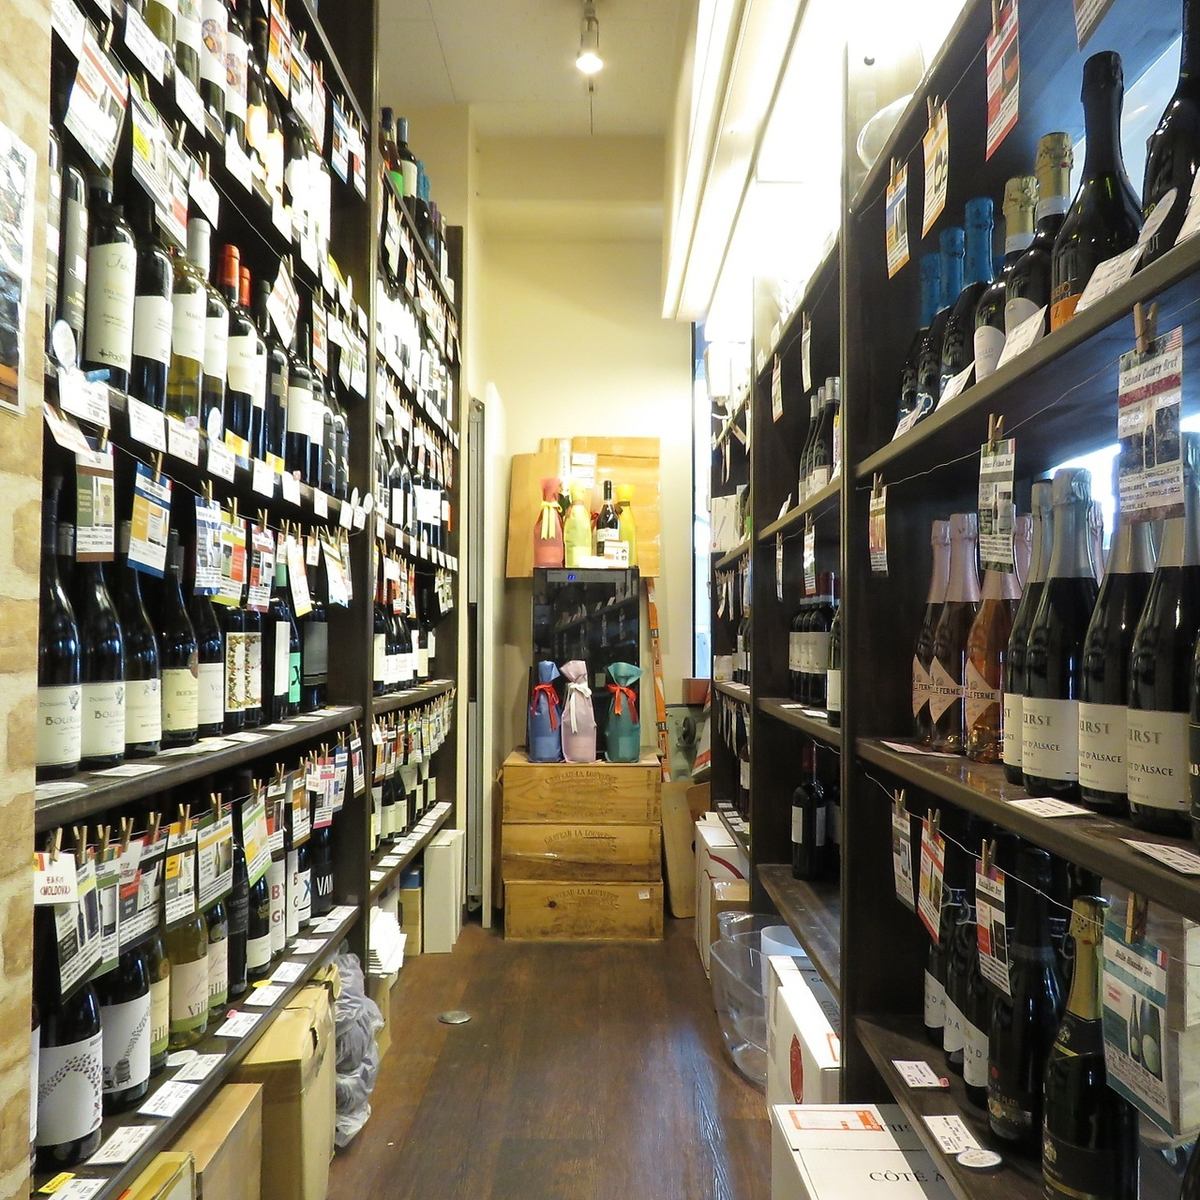 There is a wine shop, and there are always more than 2,000 bottles of wine ♪